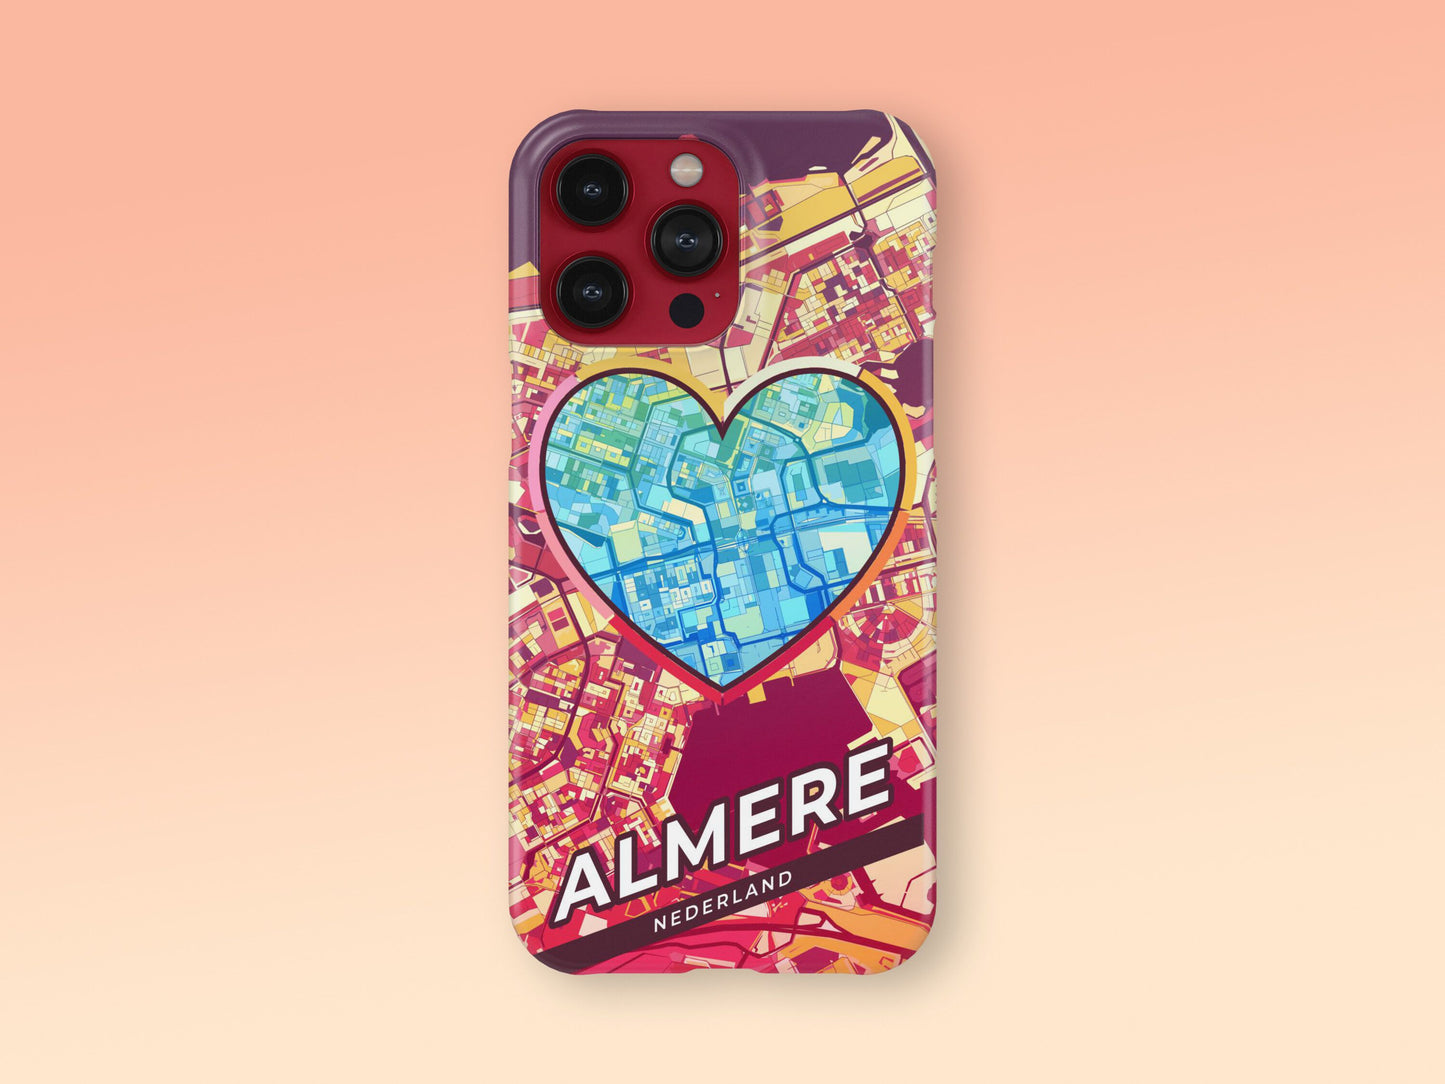 Almere Netherlands slim phone case with colorful icon. Birthday, wedding or housewarming gift. Couple match cases. 2